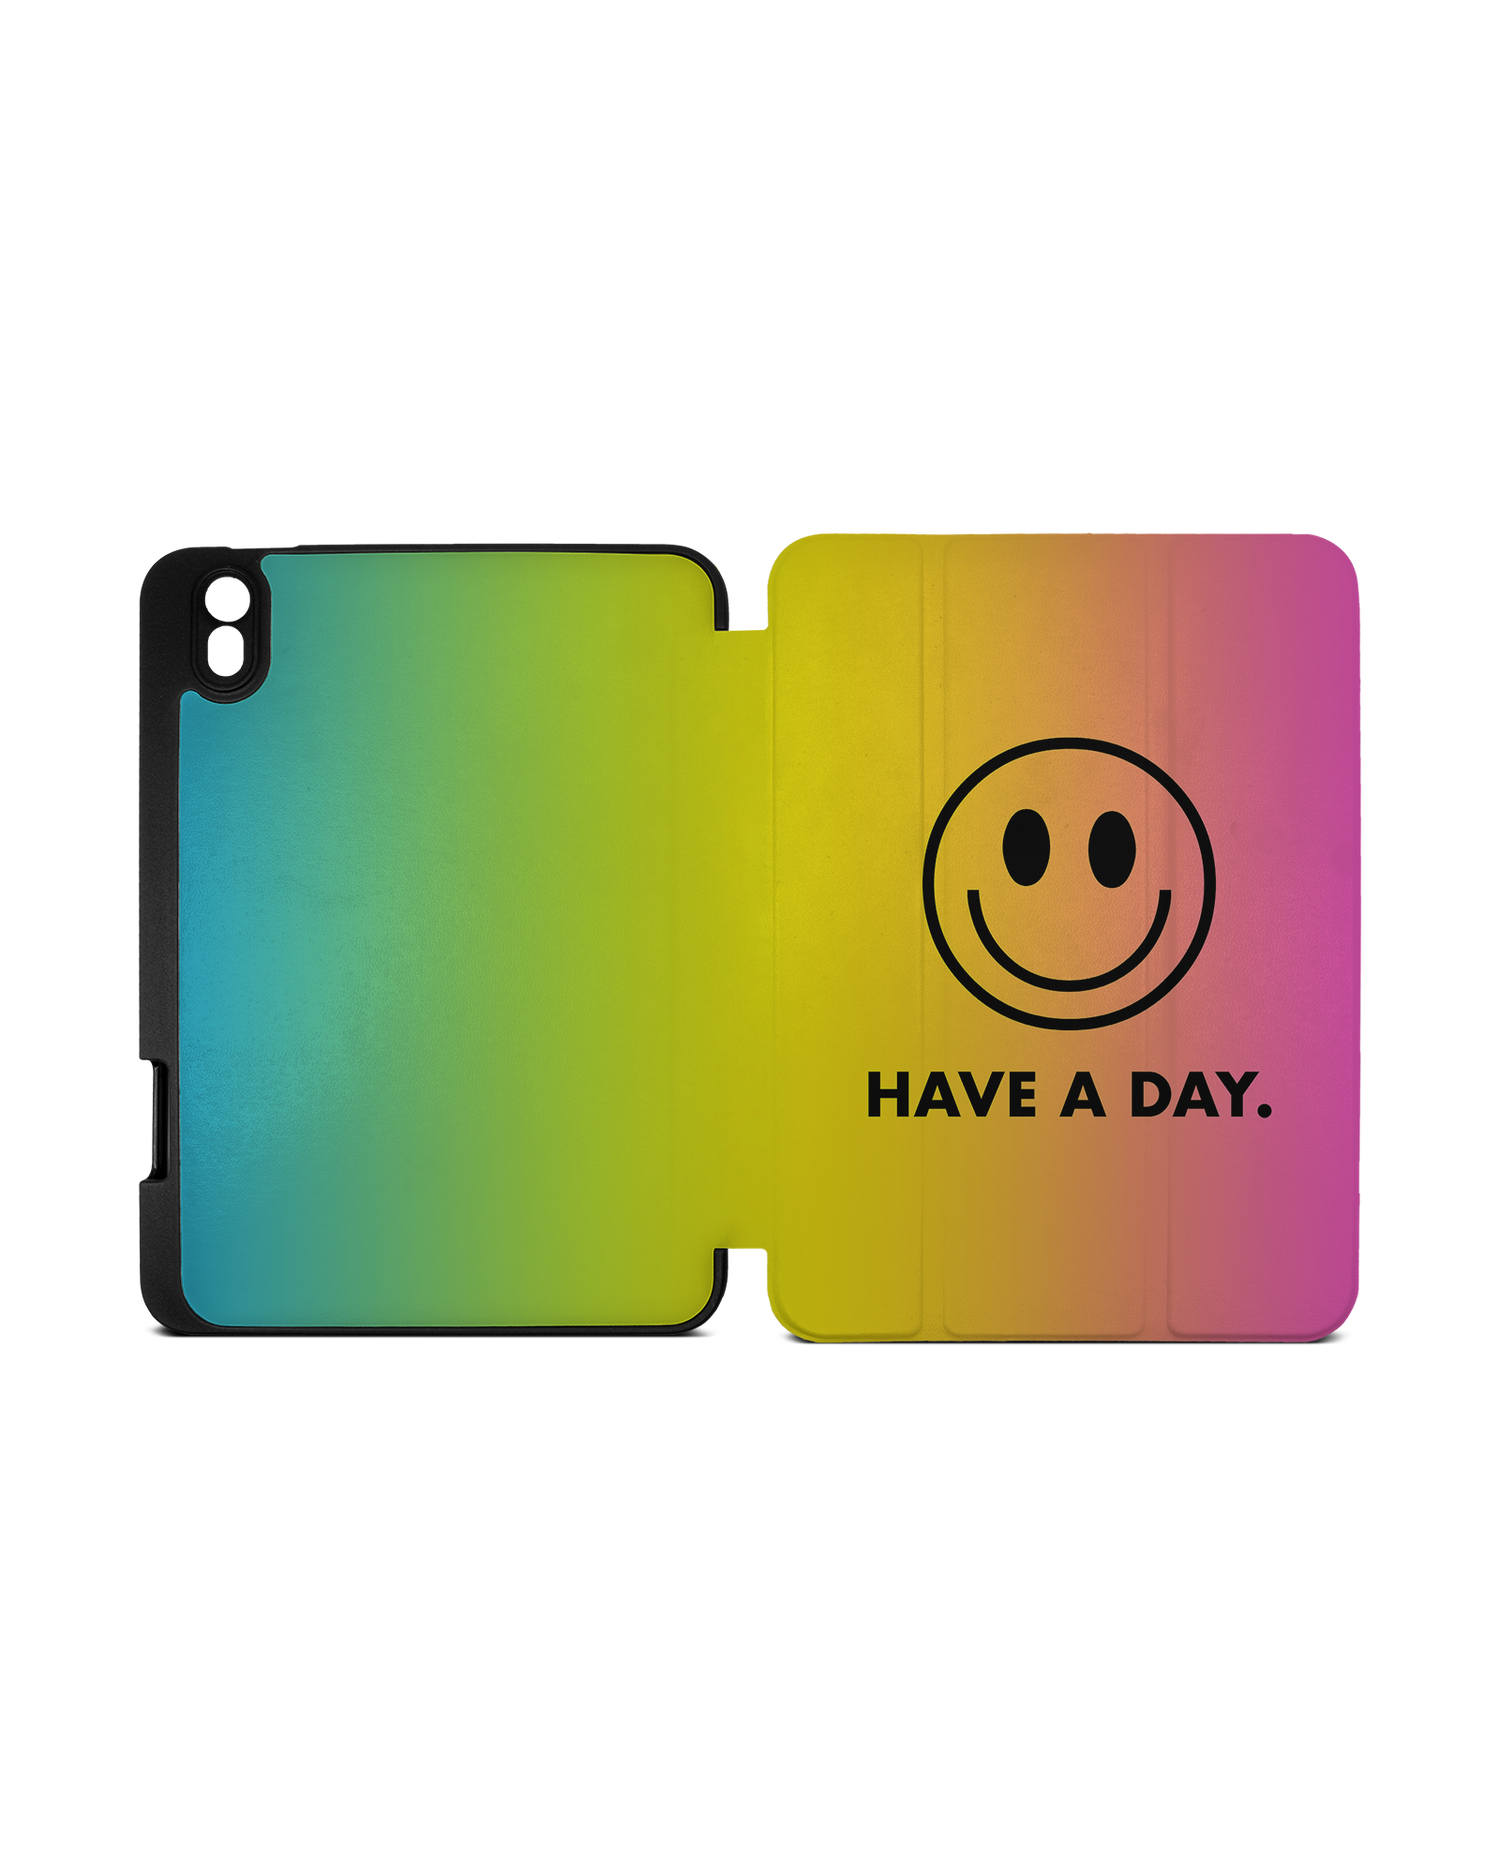 Have A Day iPad Case with Pencil Holder Apple iPad mini 6 (2021): Opened exterior view